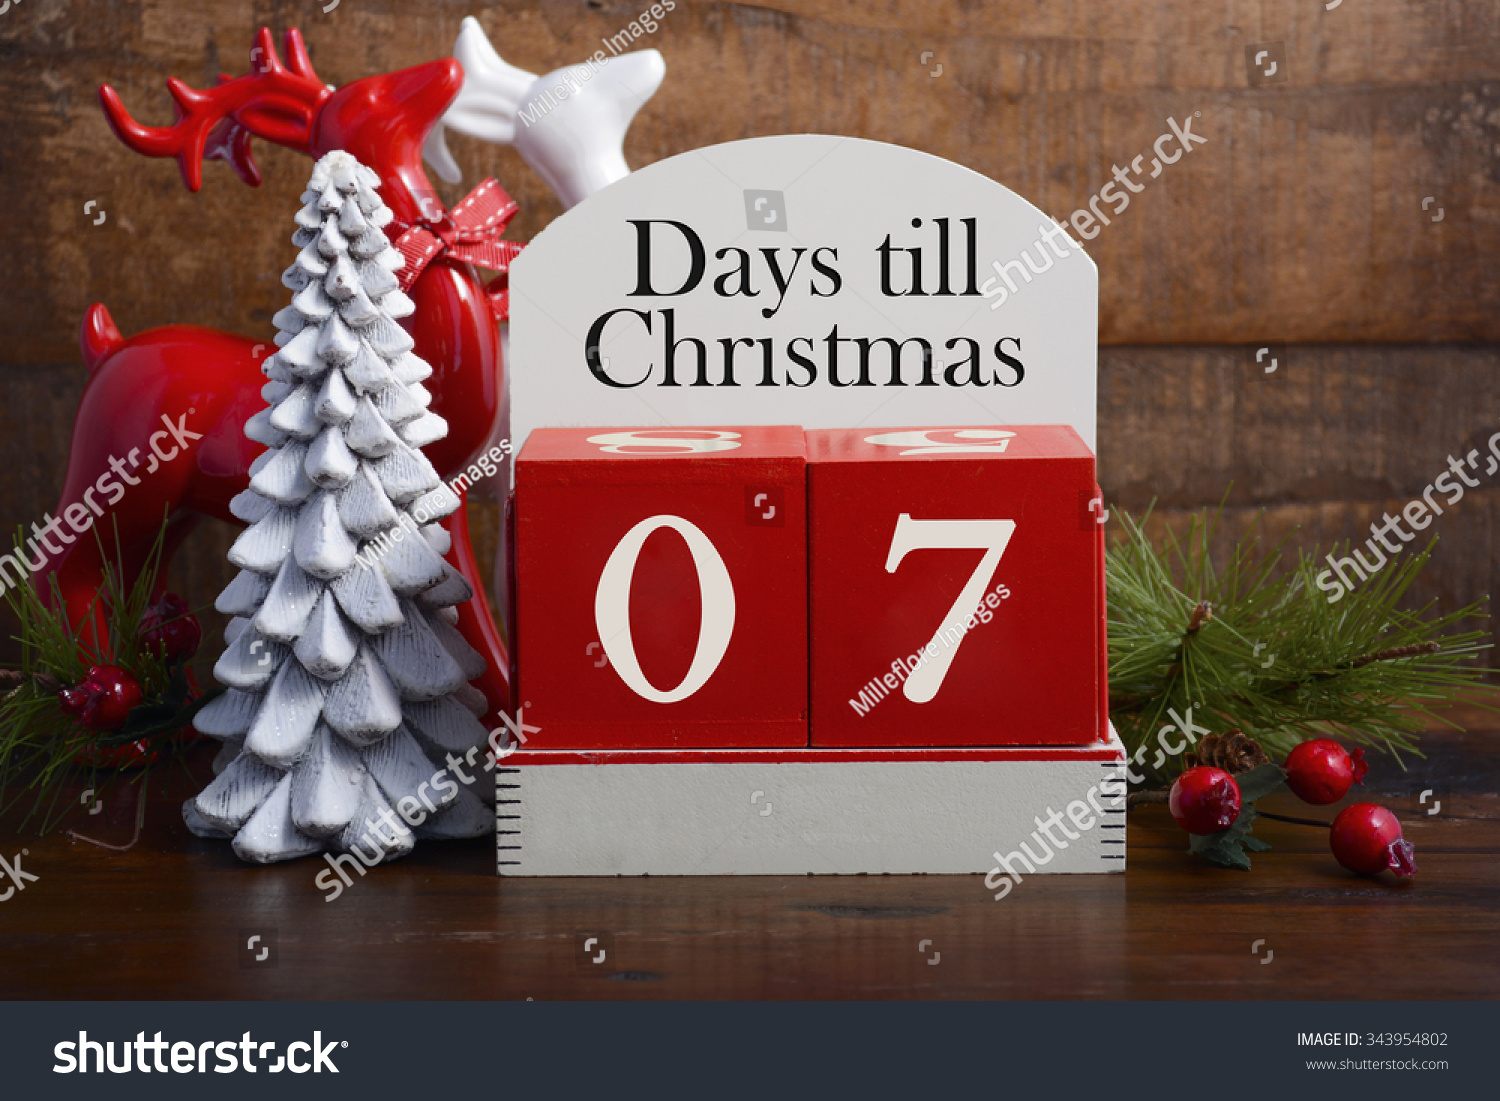 stock-photo--days-till-christmas-vintage-style-wood-calendar-with-red-and-white-reindeers-and-decorations-343954802.jpg